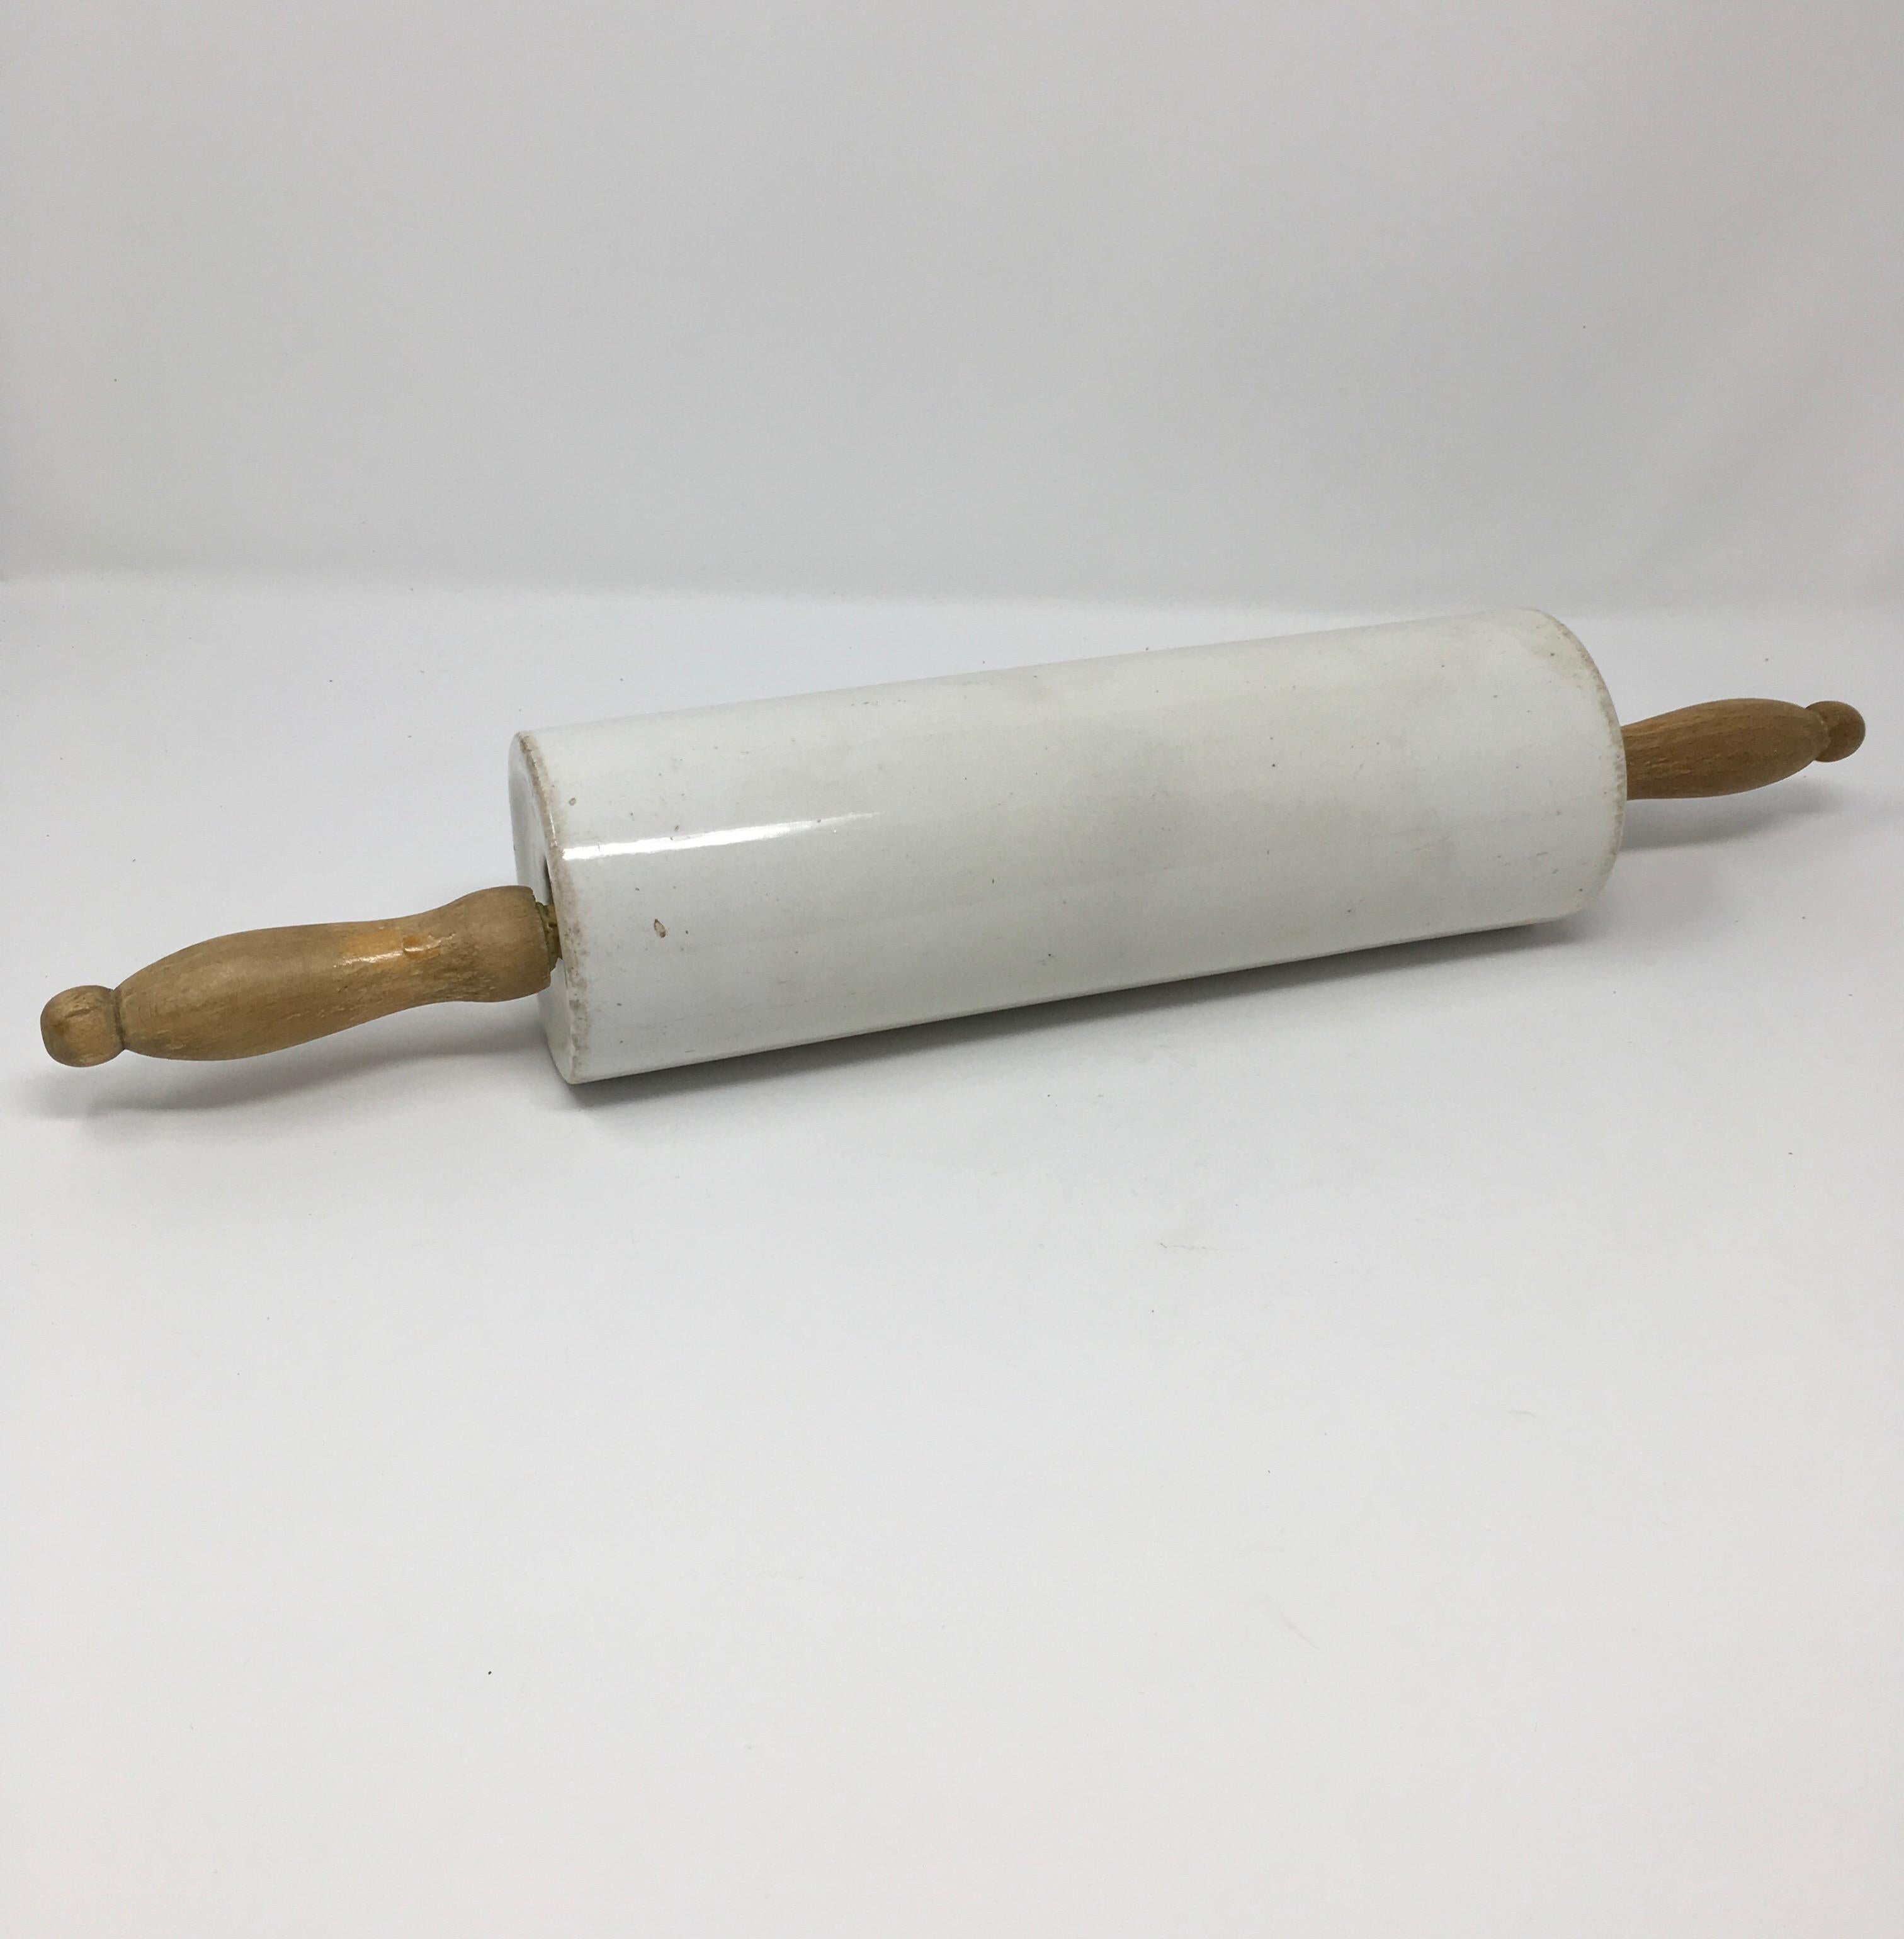 Rare Antique English Advertising Ironstone and Wood Rolling Pin 1